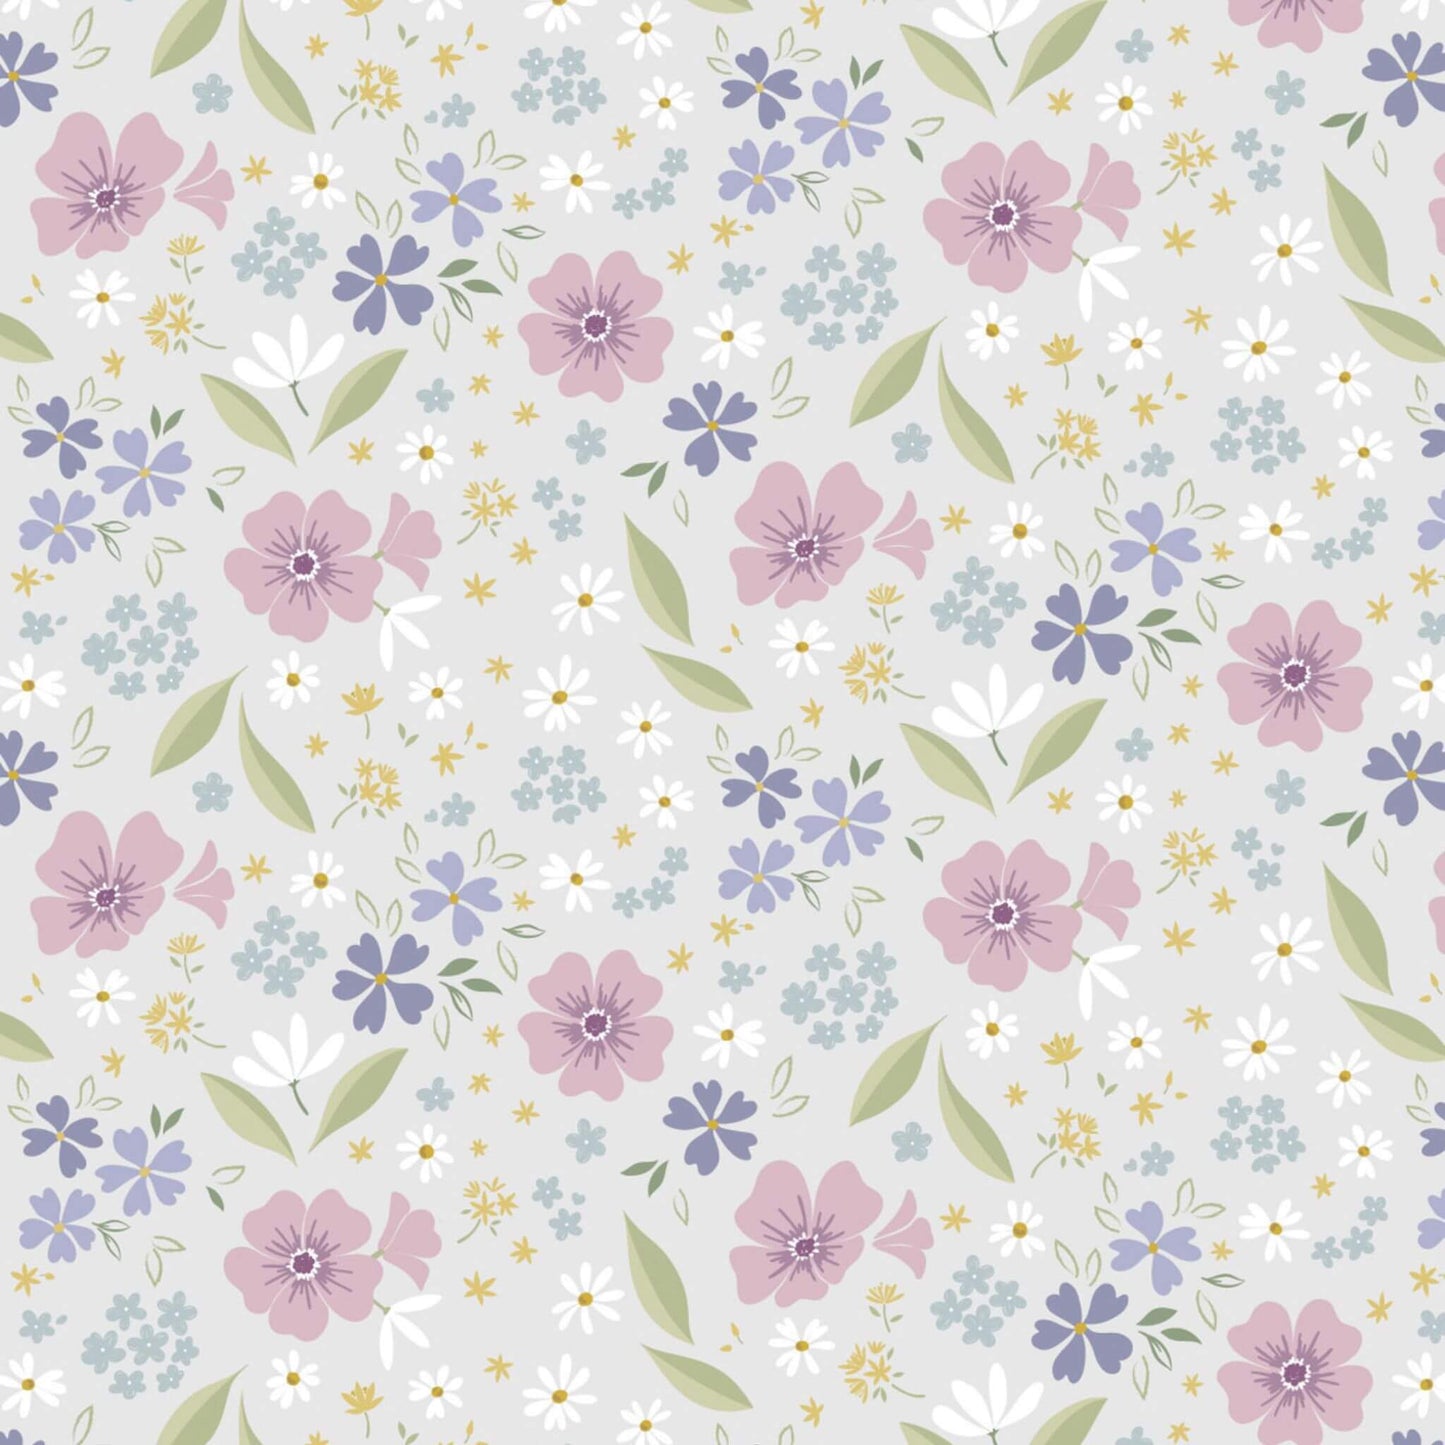 Floral Art - Floral Song Fabric Range - Lewis and Irene - Grey